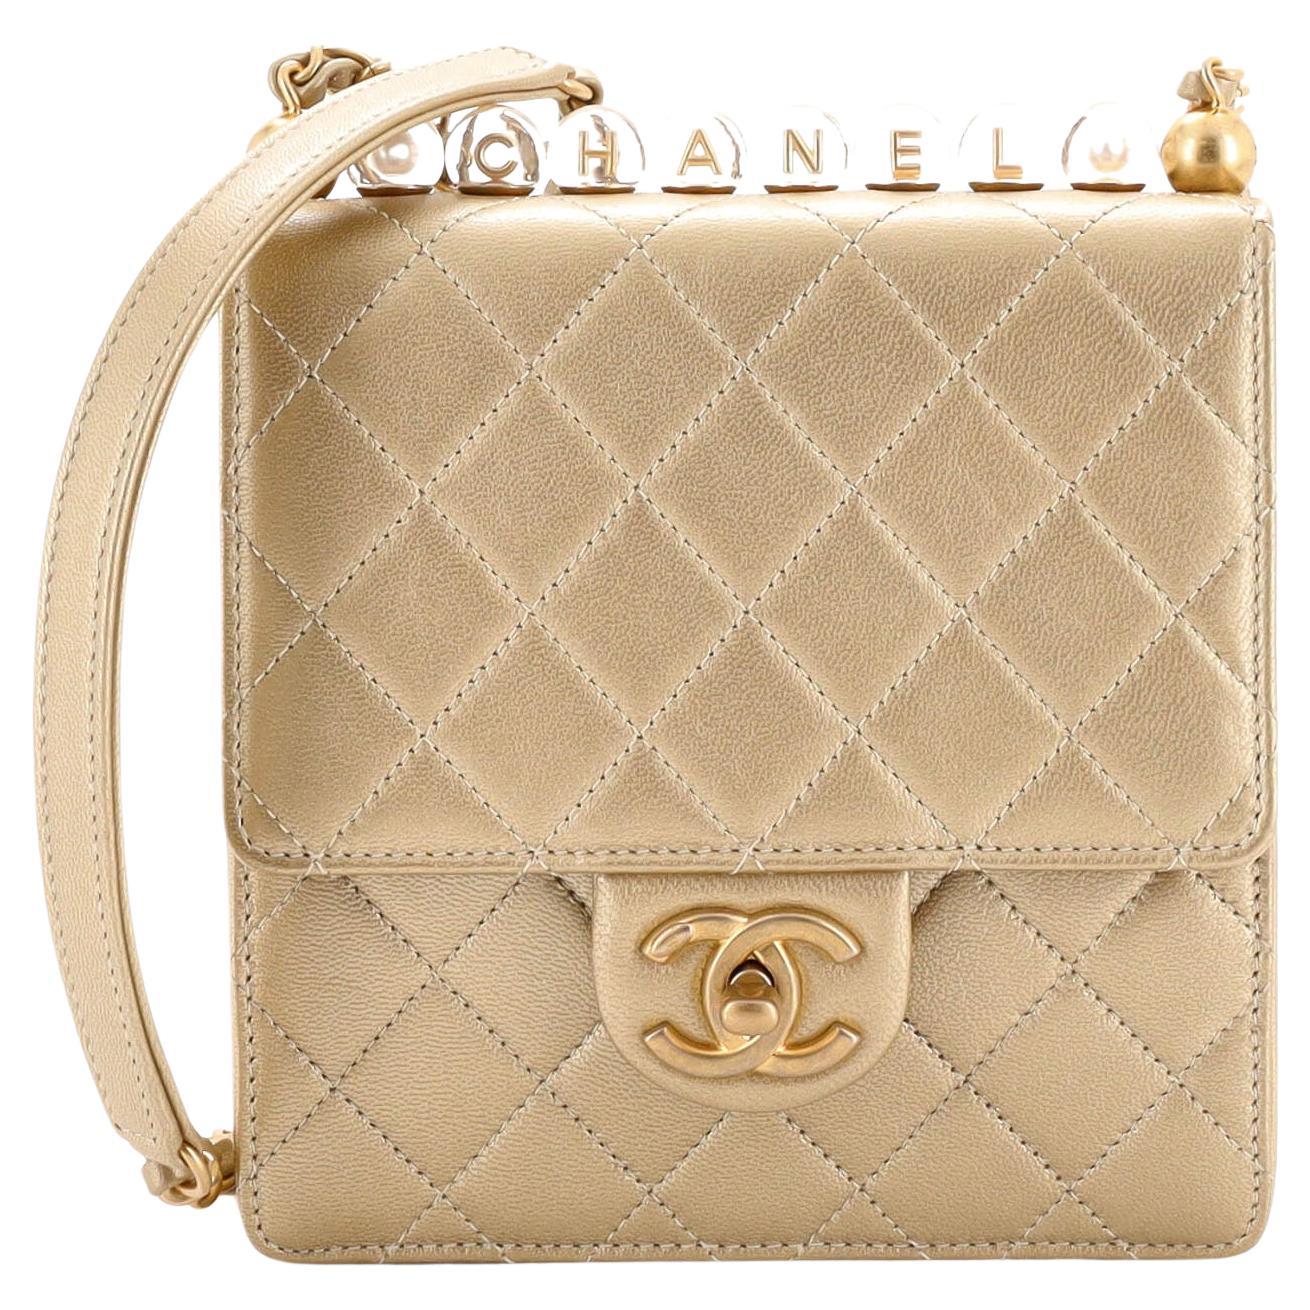 Chanel Handbags With Pearl - 63 For Sale on 1stDibs